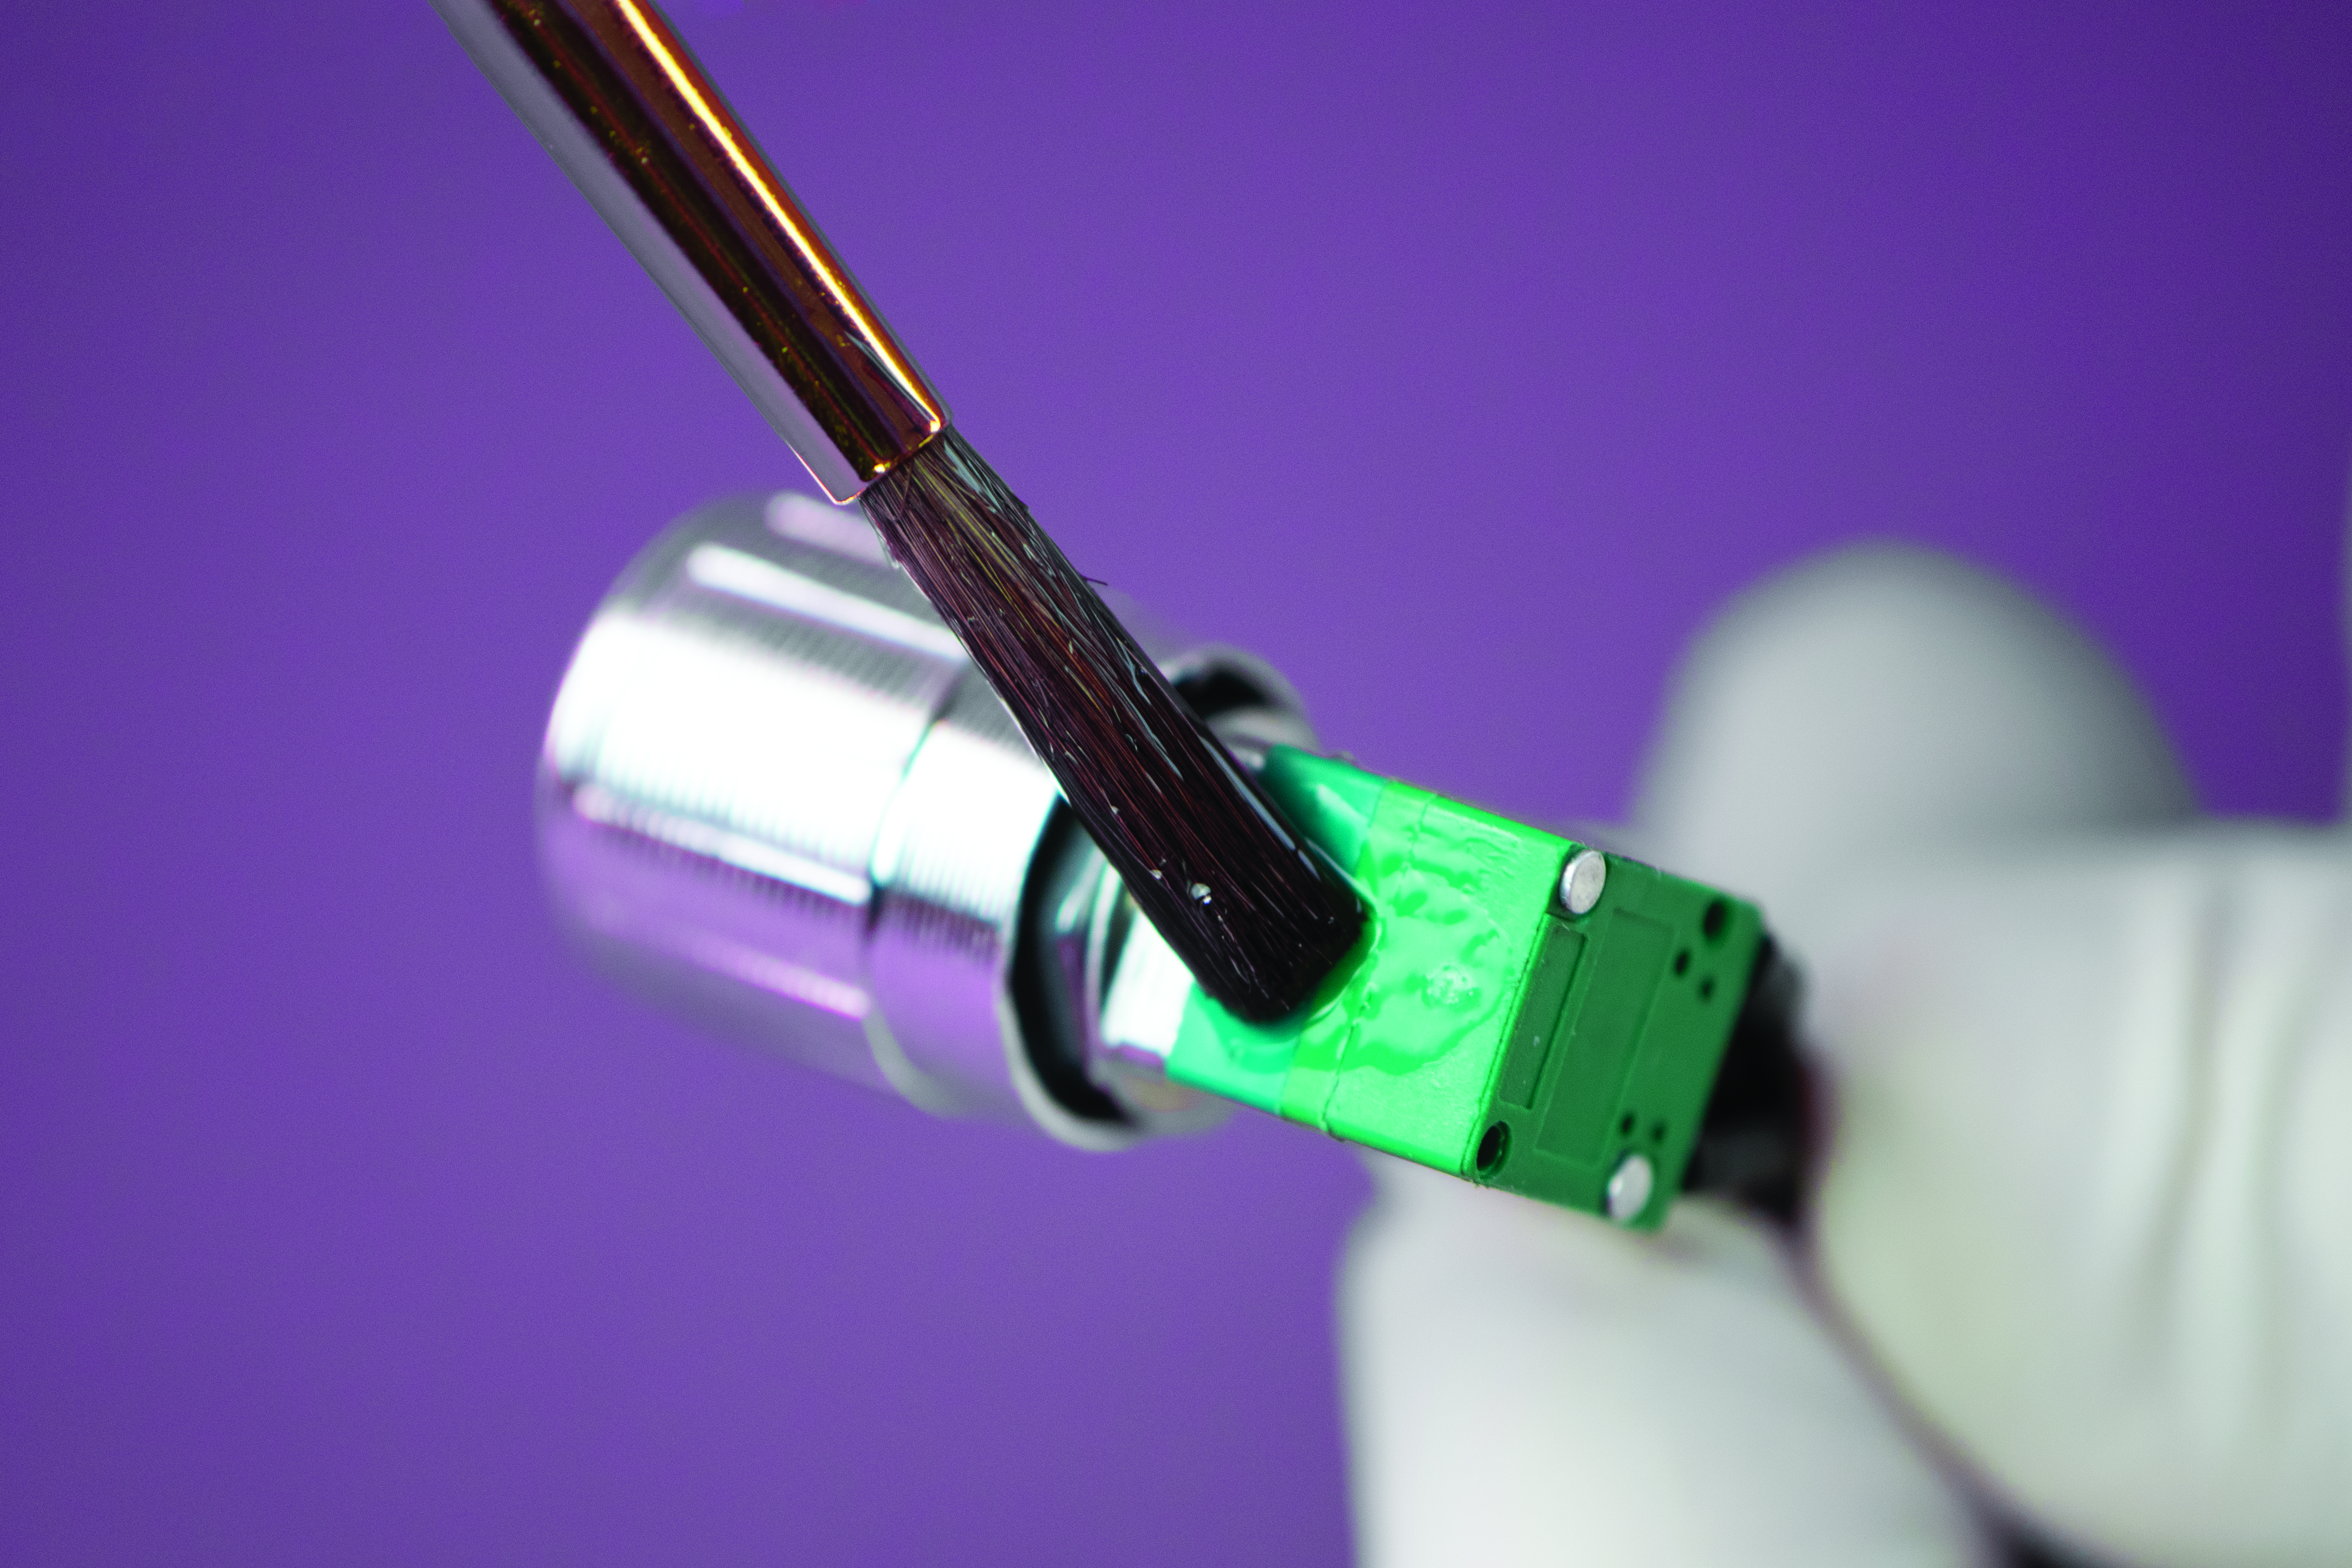 Ultra-Low Viscosity, Biocompatible Epoxy Offers Optical Clarity